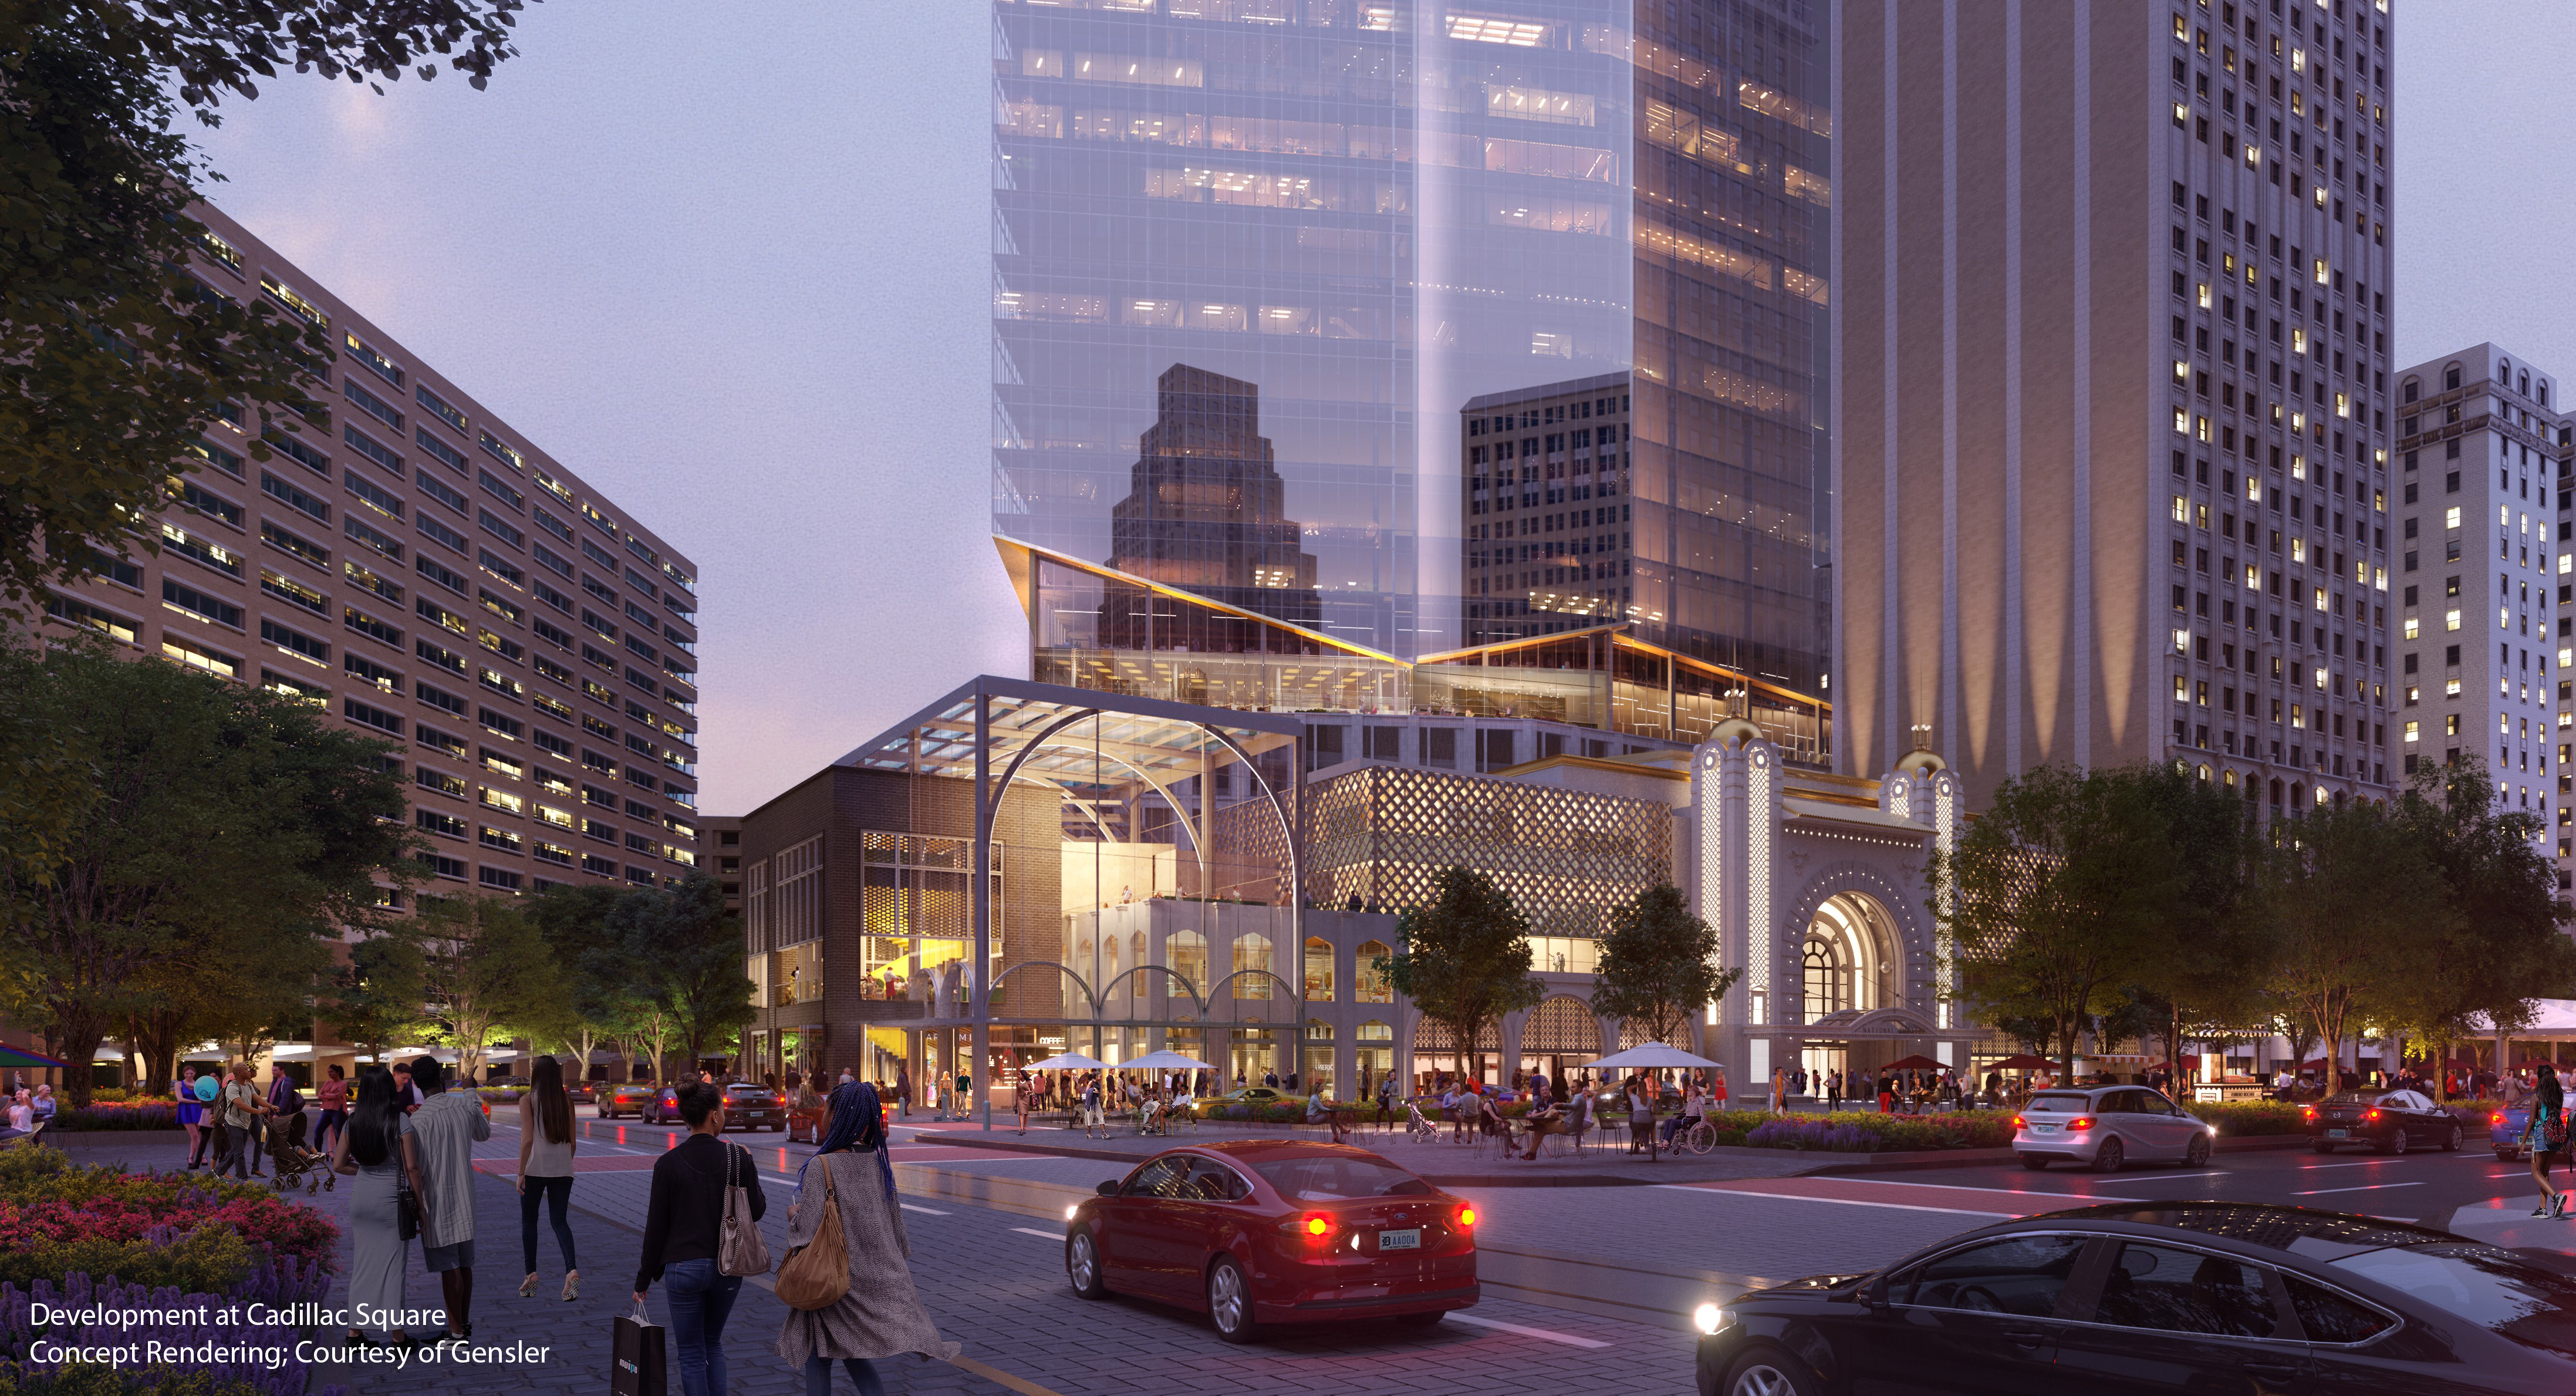 A rendering of Bedrock’s plans for the development of Cadillac Square in downtown, Detroit, Michigan.